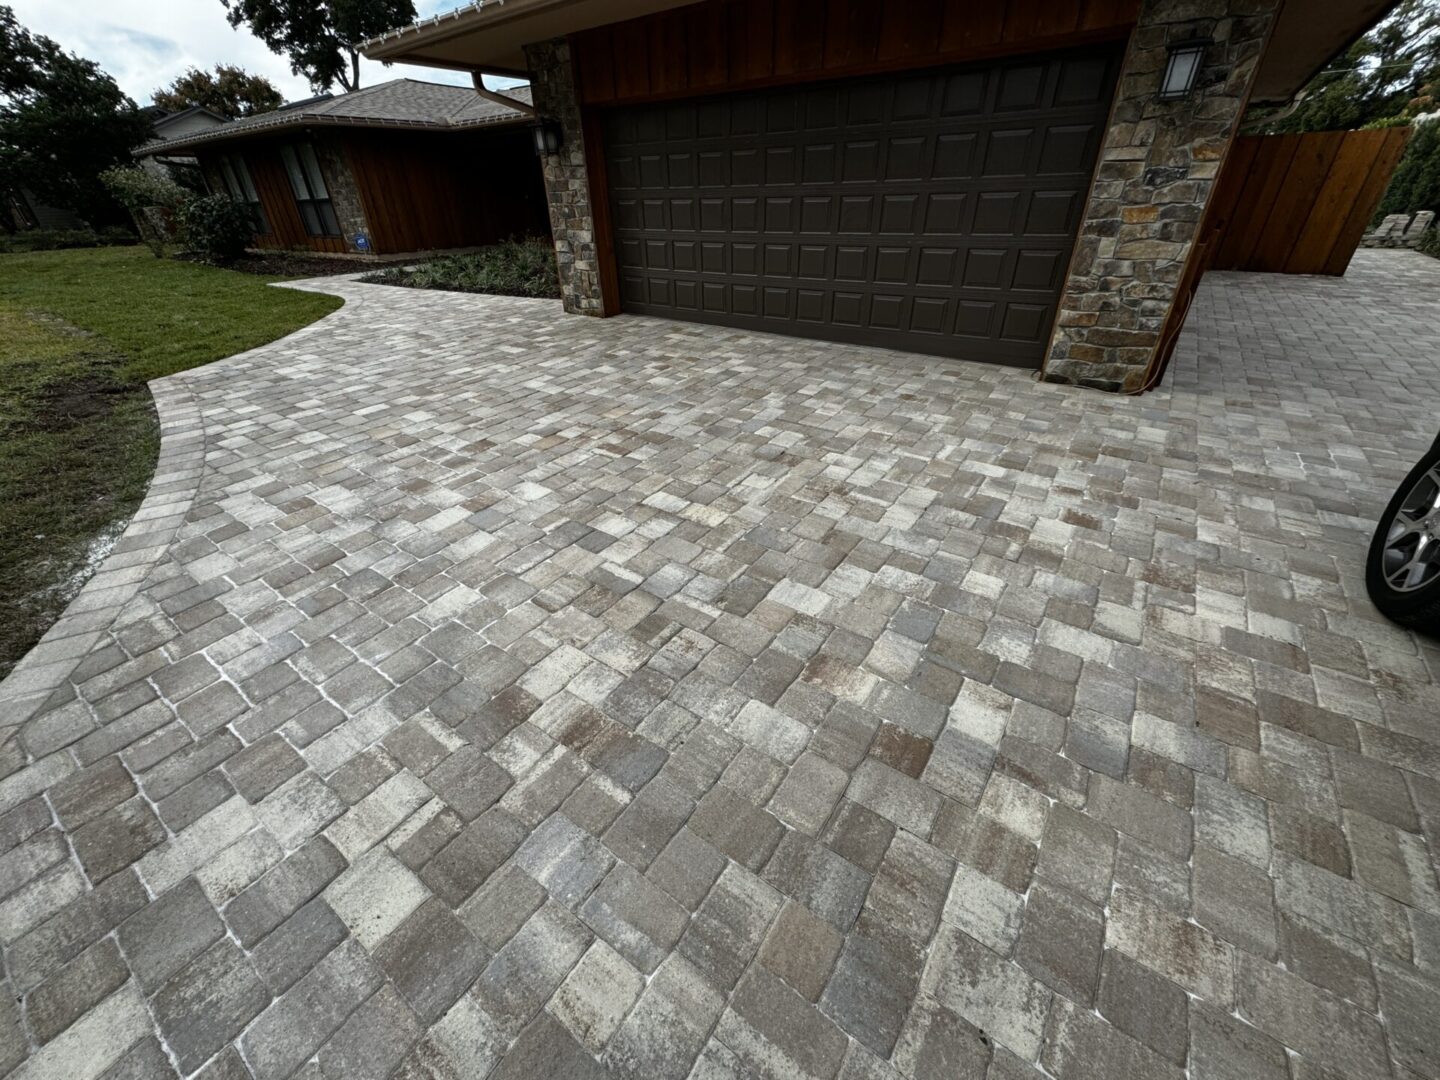 A driveway with a light brown, interlocking brick paver design leads to a house with a double garage door.